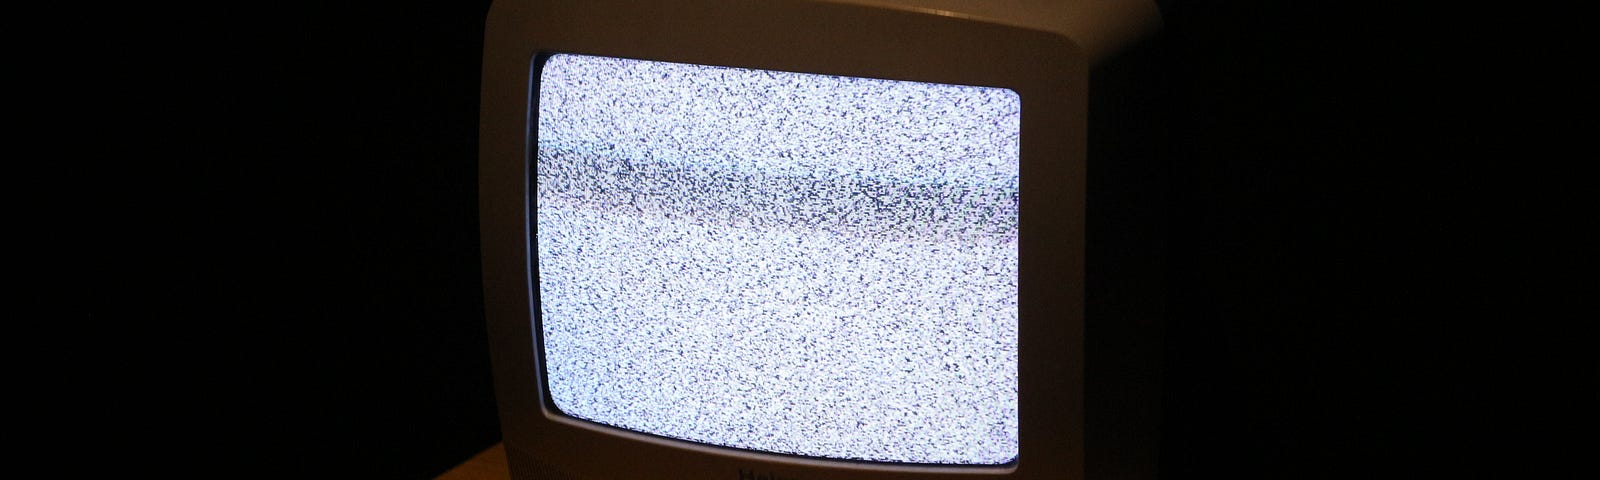 A vintage TV set on a small wooden table in a dark room. It only shows static.